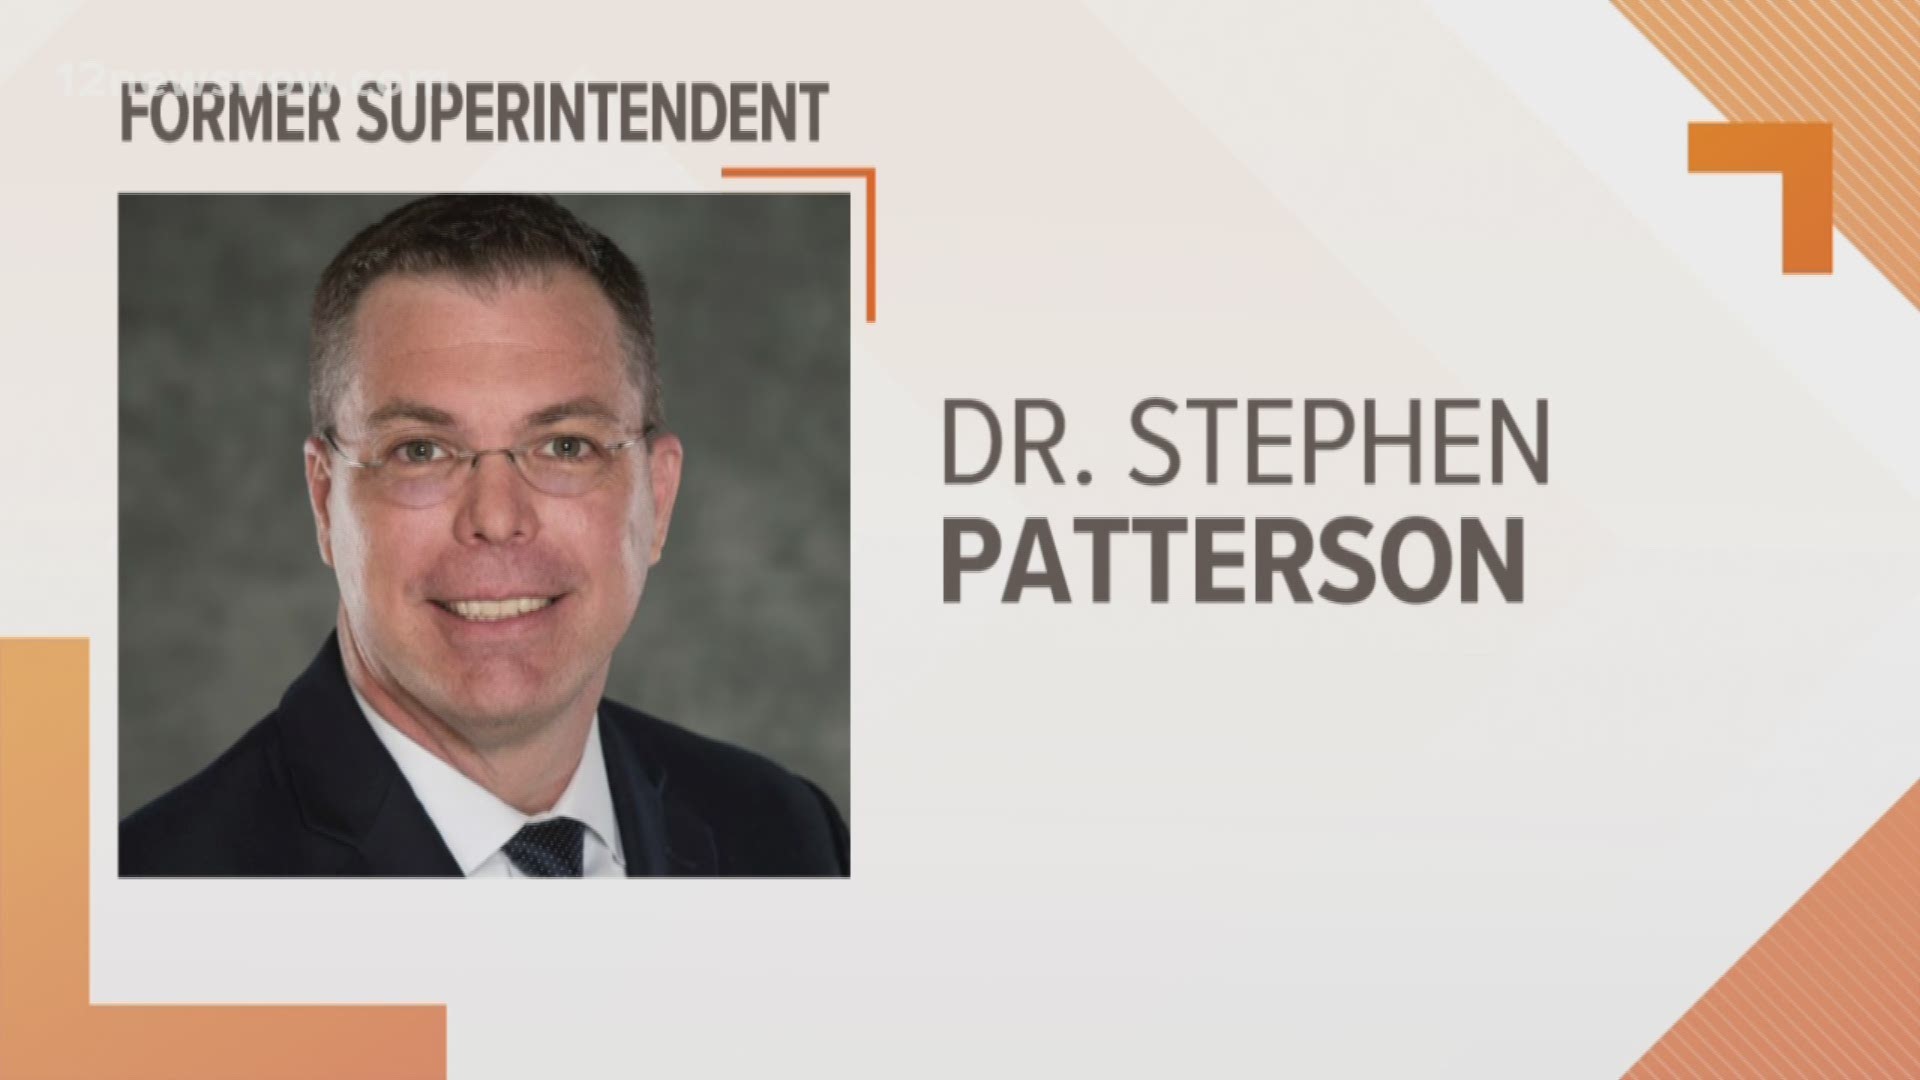 Dr. Stephen Patterson resigned, with the school board saying it's in the best interest of the district,